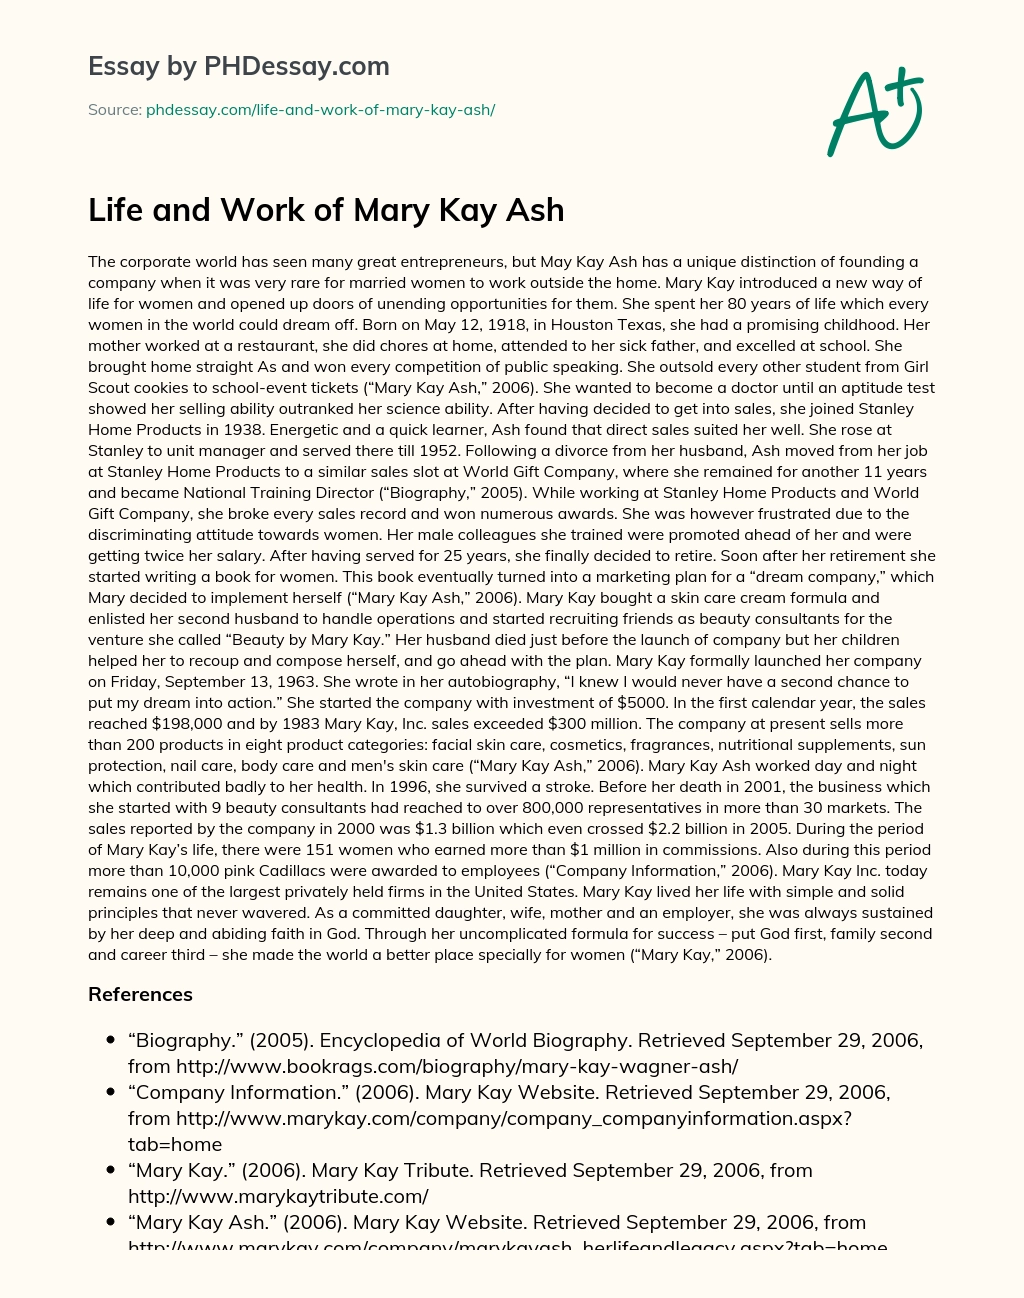 Life and Work of Mary Kay Ash essay